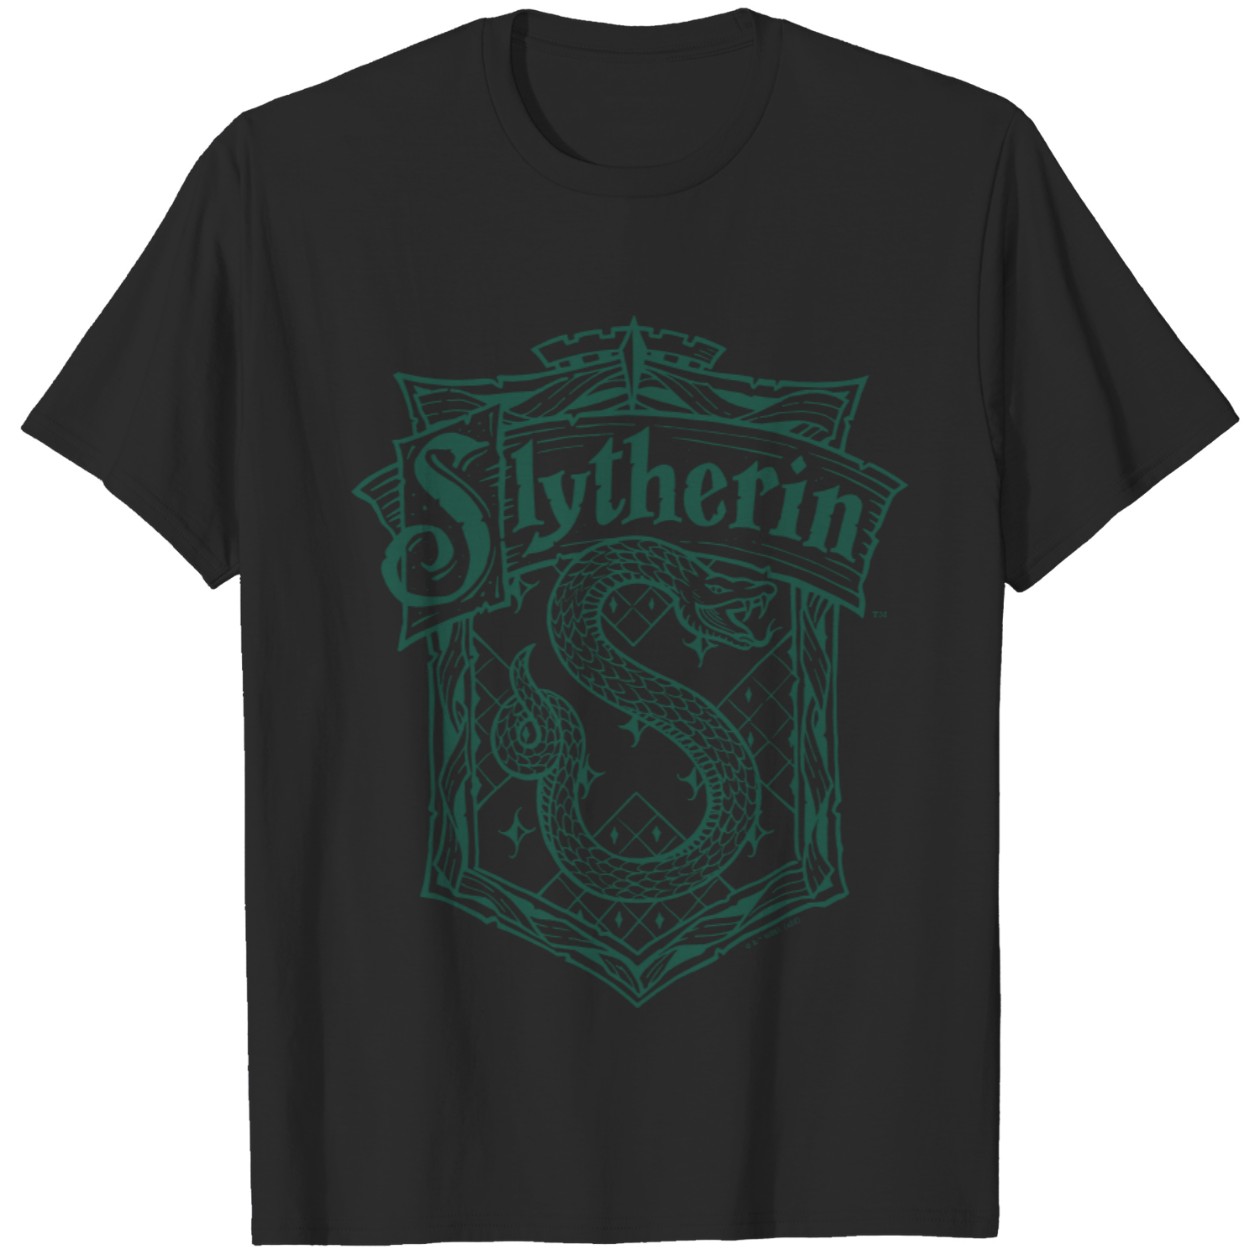 Show Your House Loyalty with Stylish Crest T-Shirt IYT